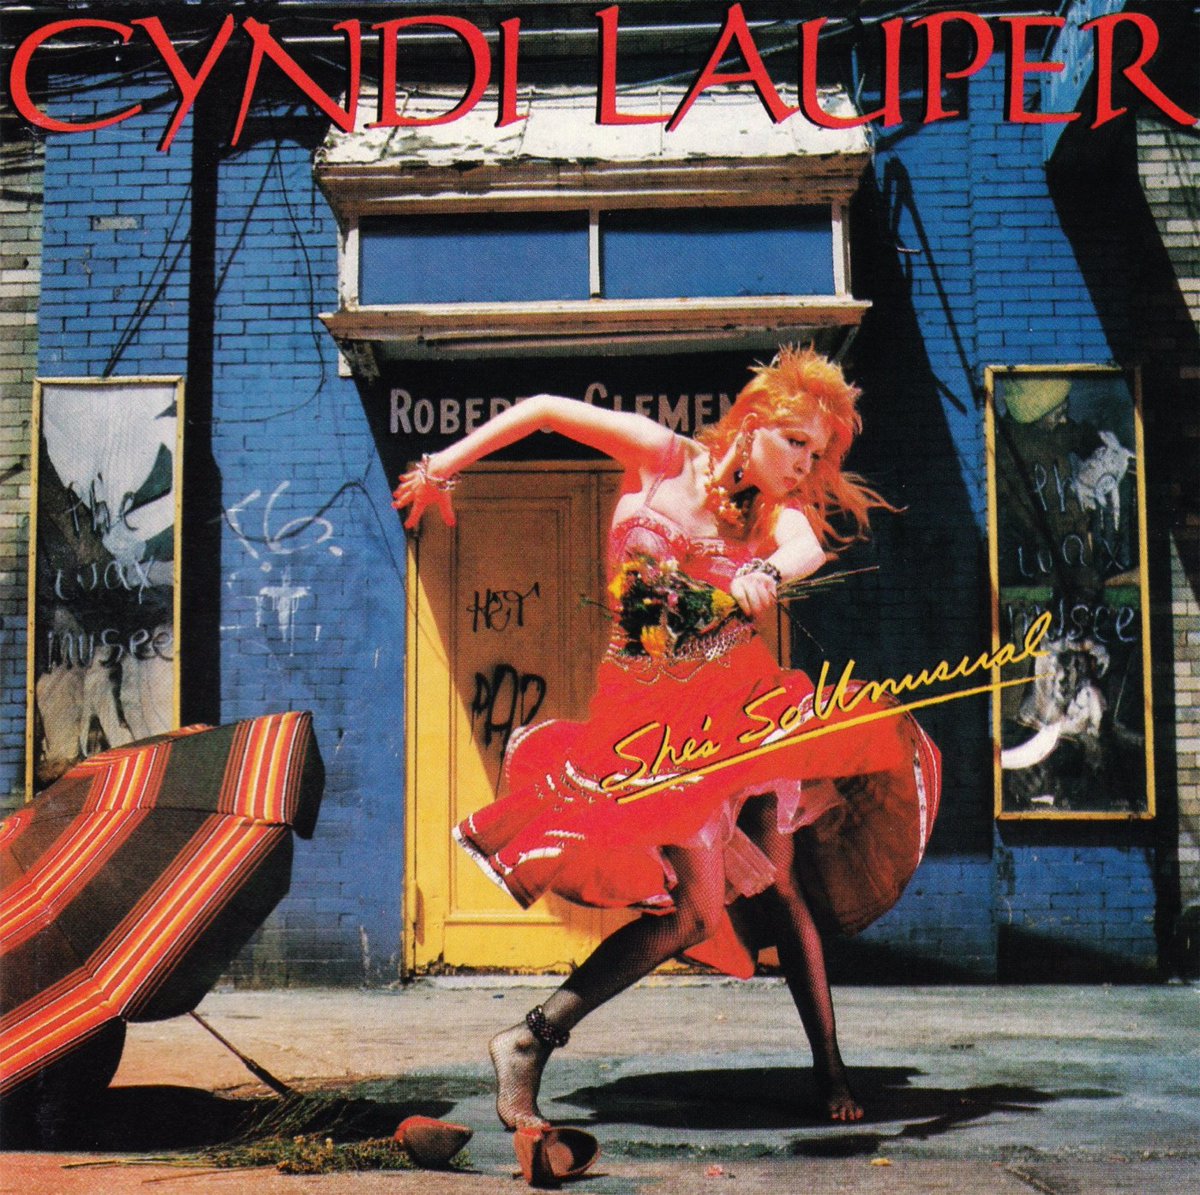 As for Cyndi, she released her "When You Were Mine" cover on the 'She's So Unusual' album; which was produced by Rick Chertoff.Rick also produced Joan Osborne's "One Of Us".And Prince covered "One Of Us" for his 'Emancipation' album in 1996. |  #FullCircle  #TLCConnections